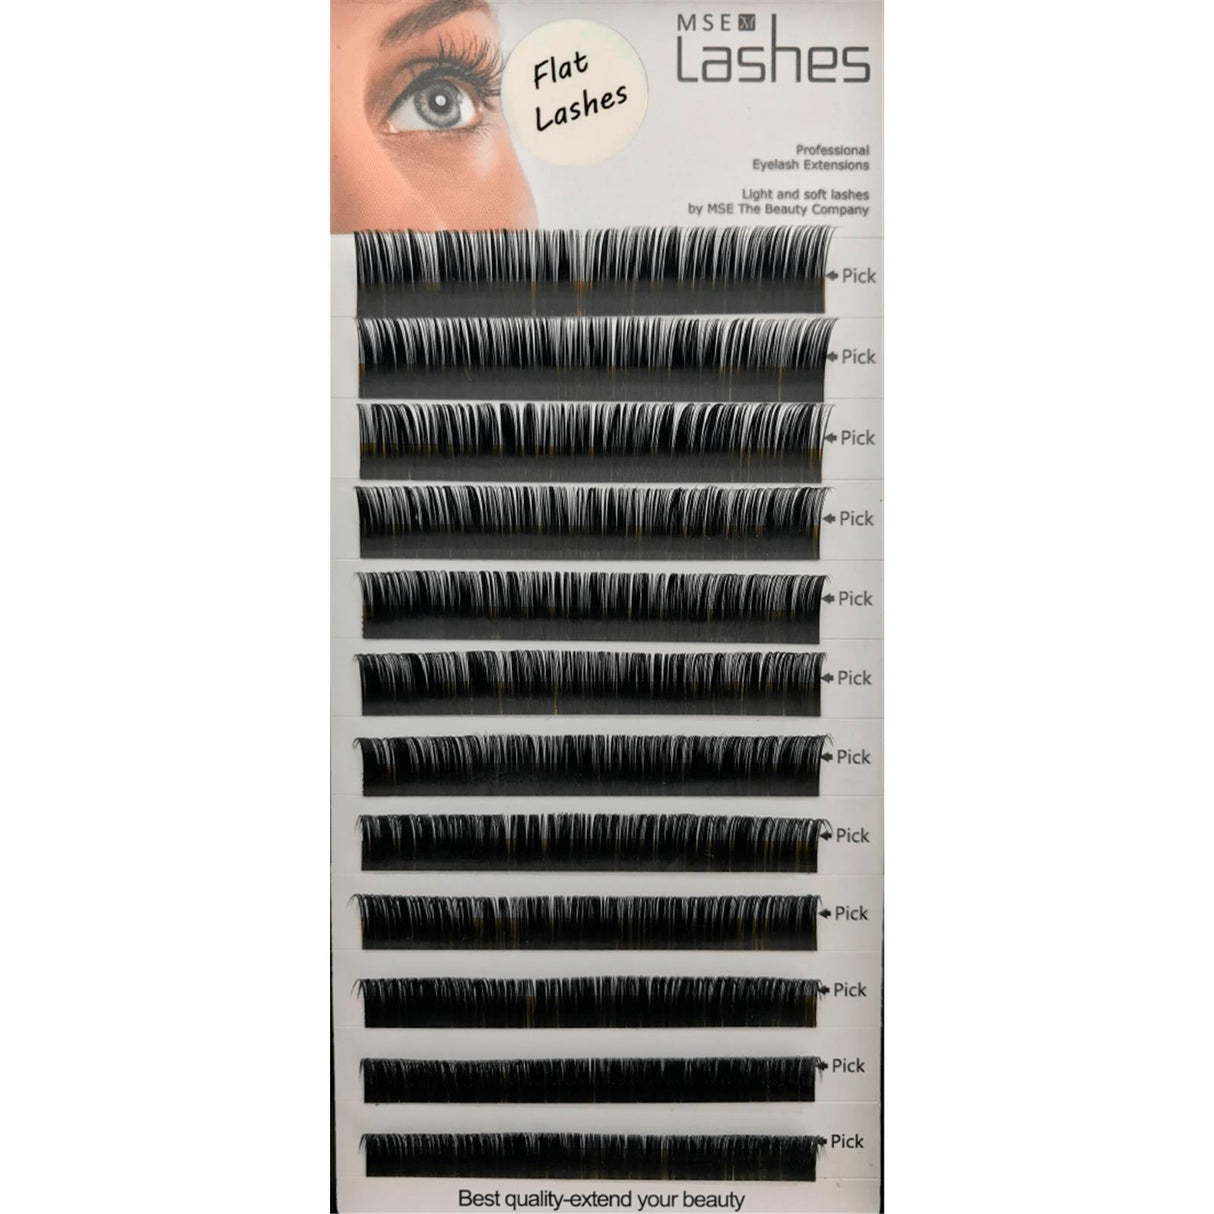 Seidenwimpern Flat Lashes Trays - D-Curl - 0,15 mm - 13 mm - MSE - The Beauty Company